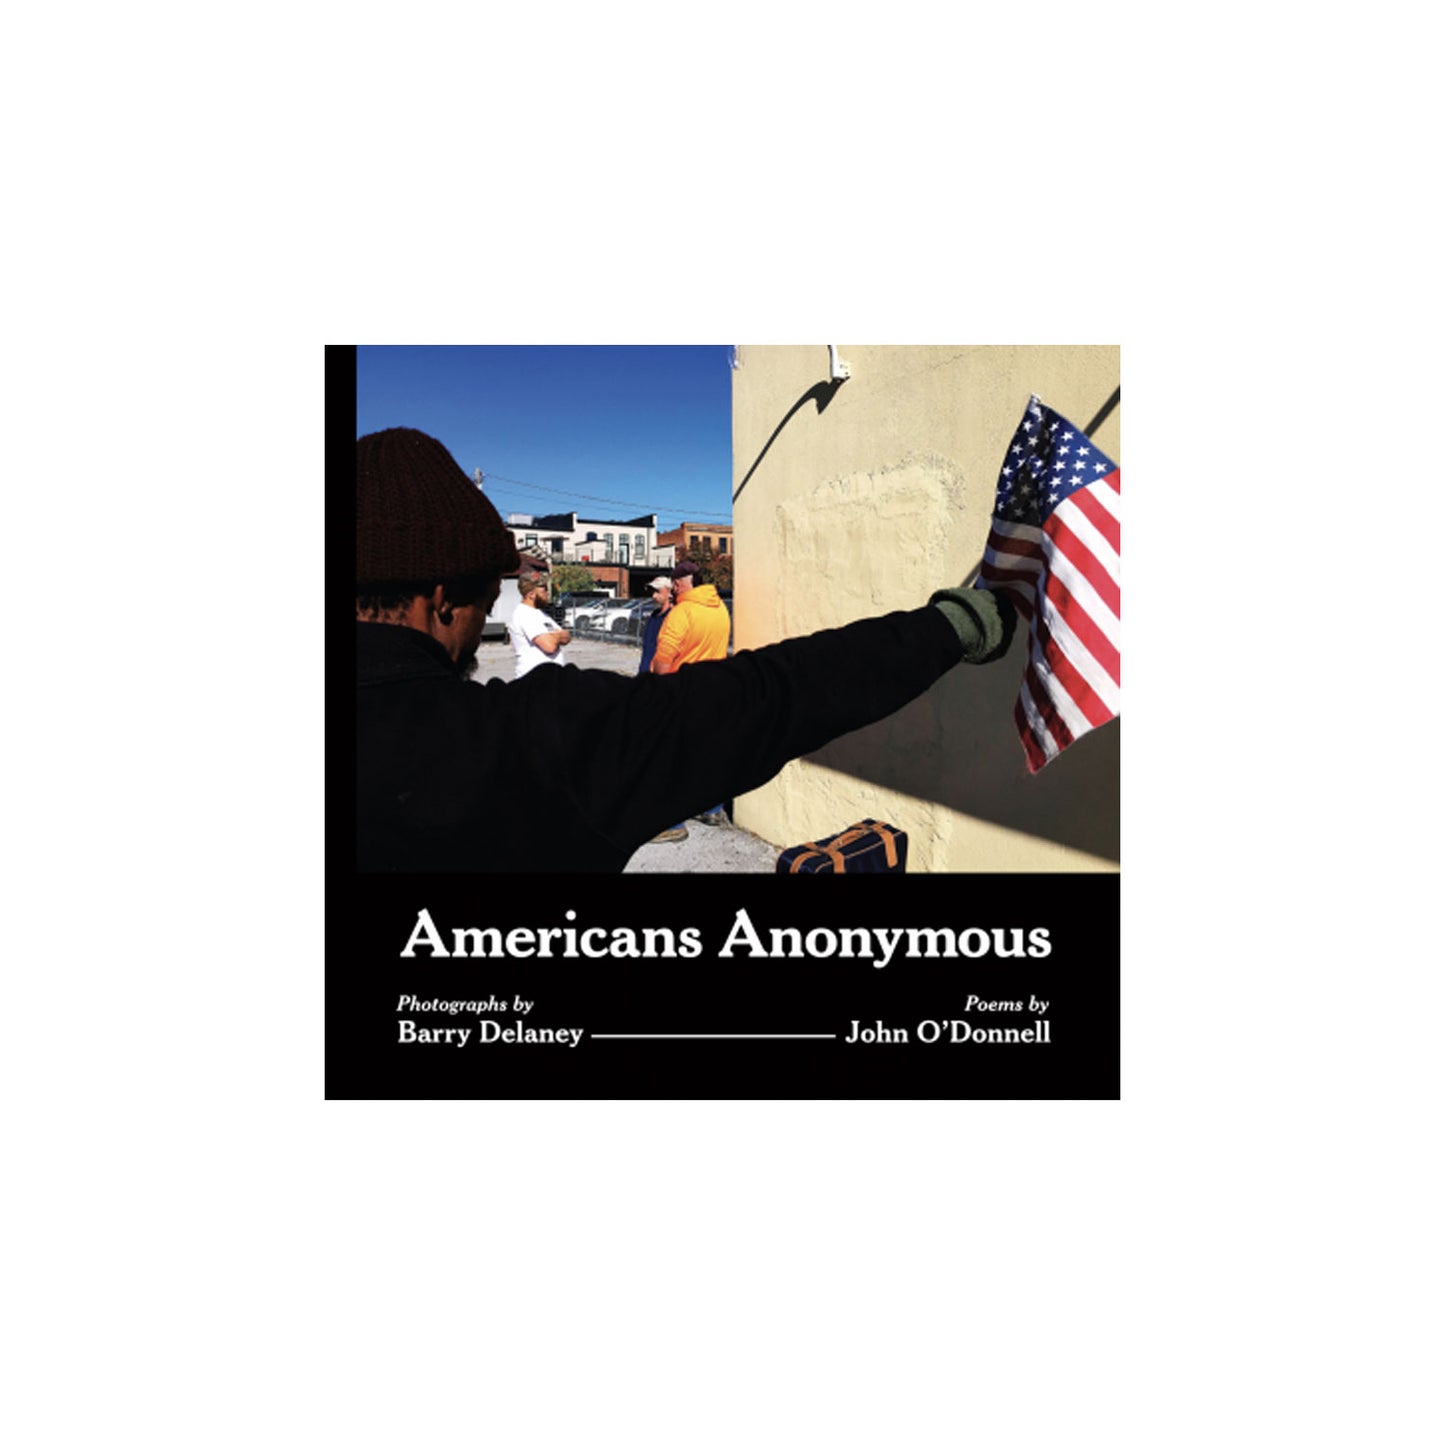 Americans Anonymous by Barry Delaney & John O'Donnell Photo Museum Ireland